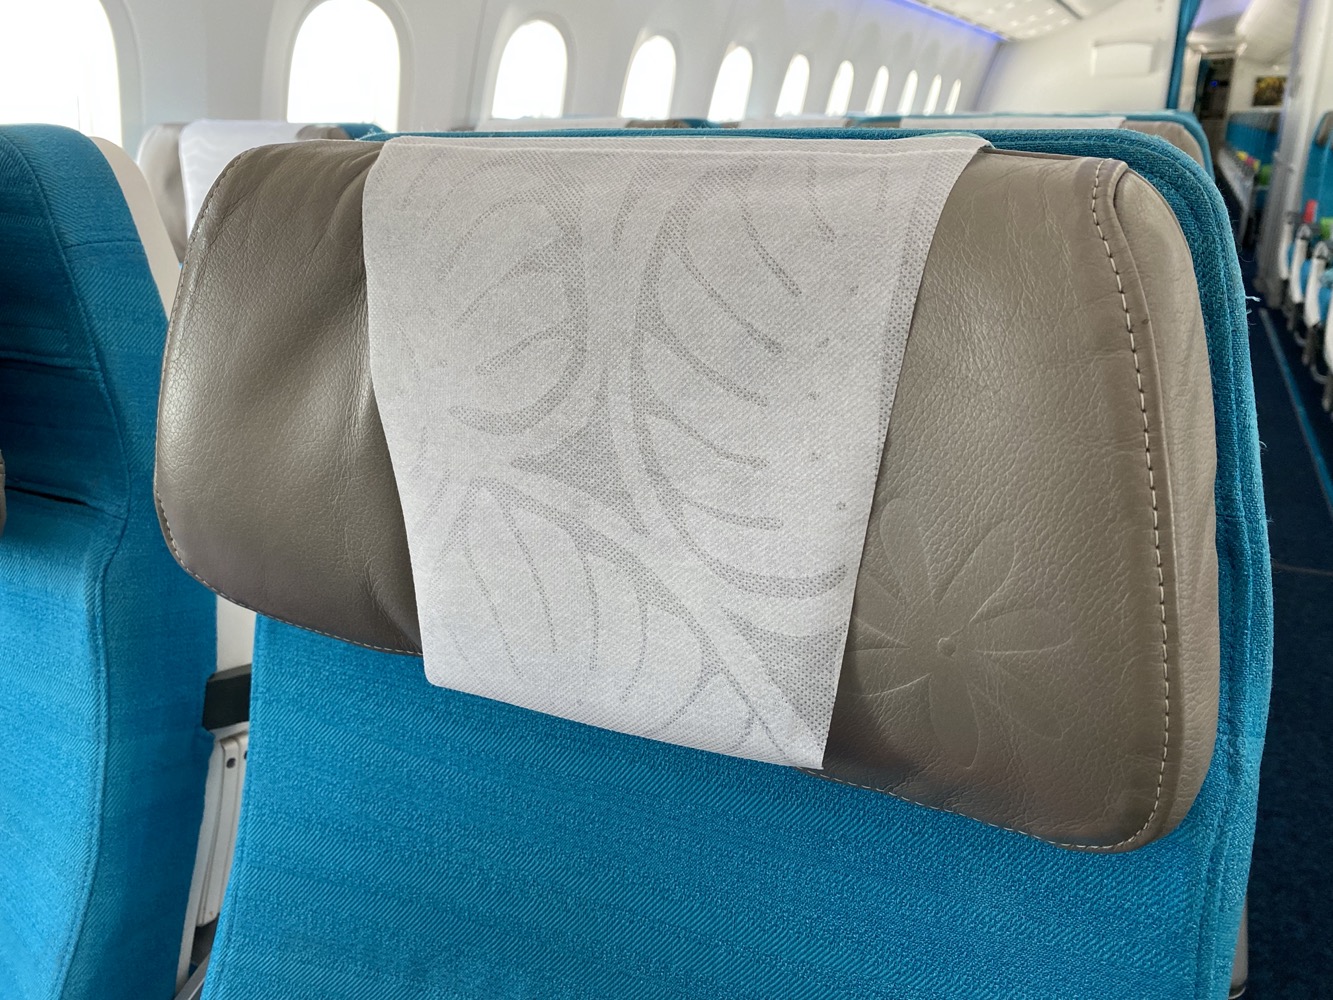 a tissue paper on a seat